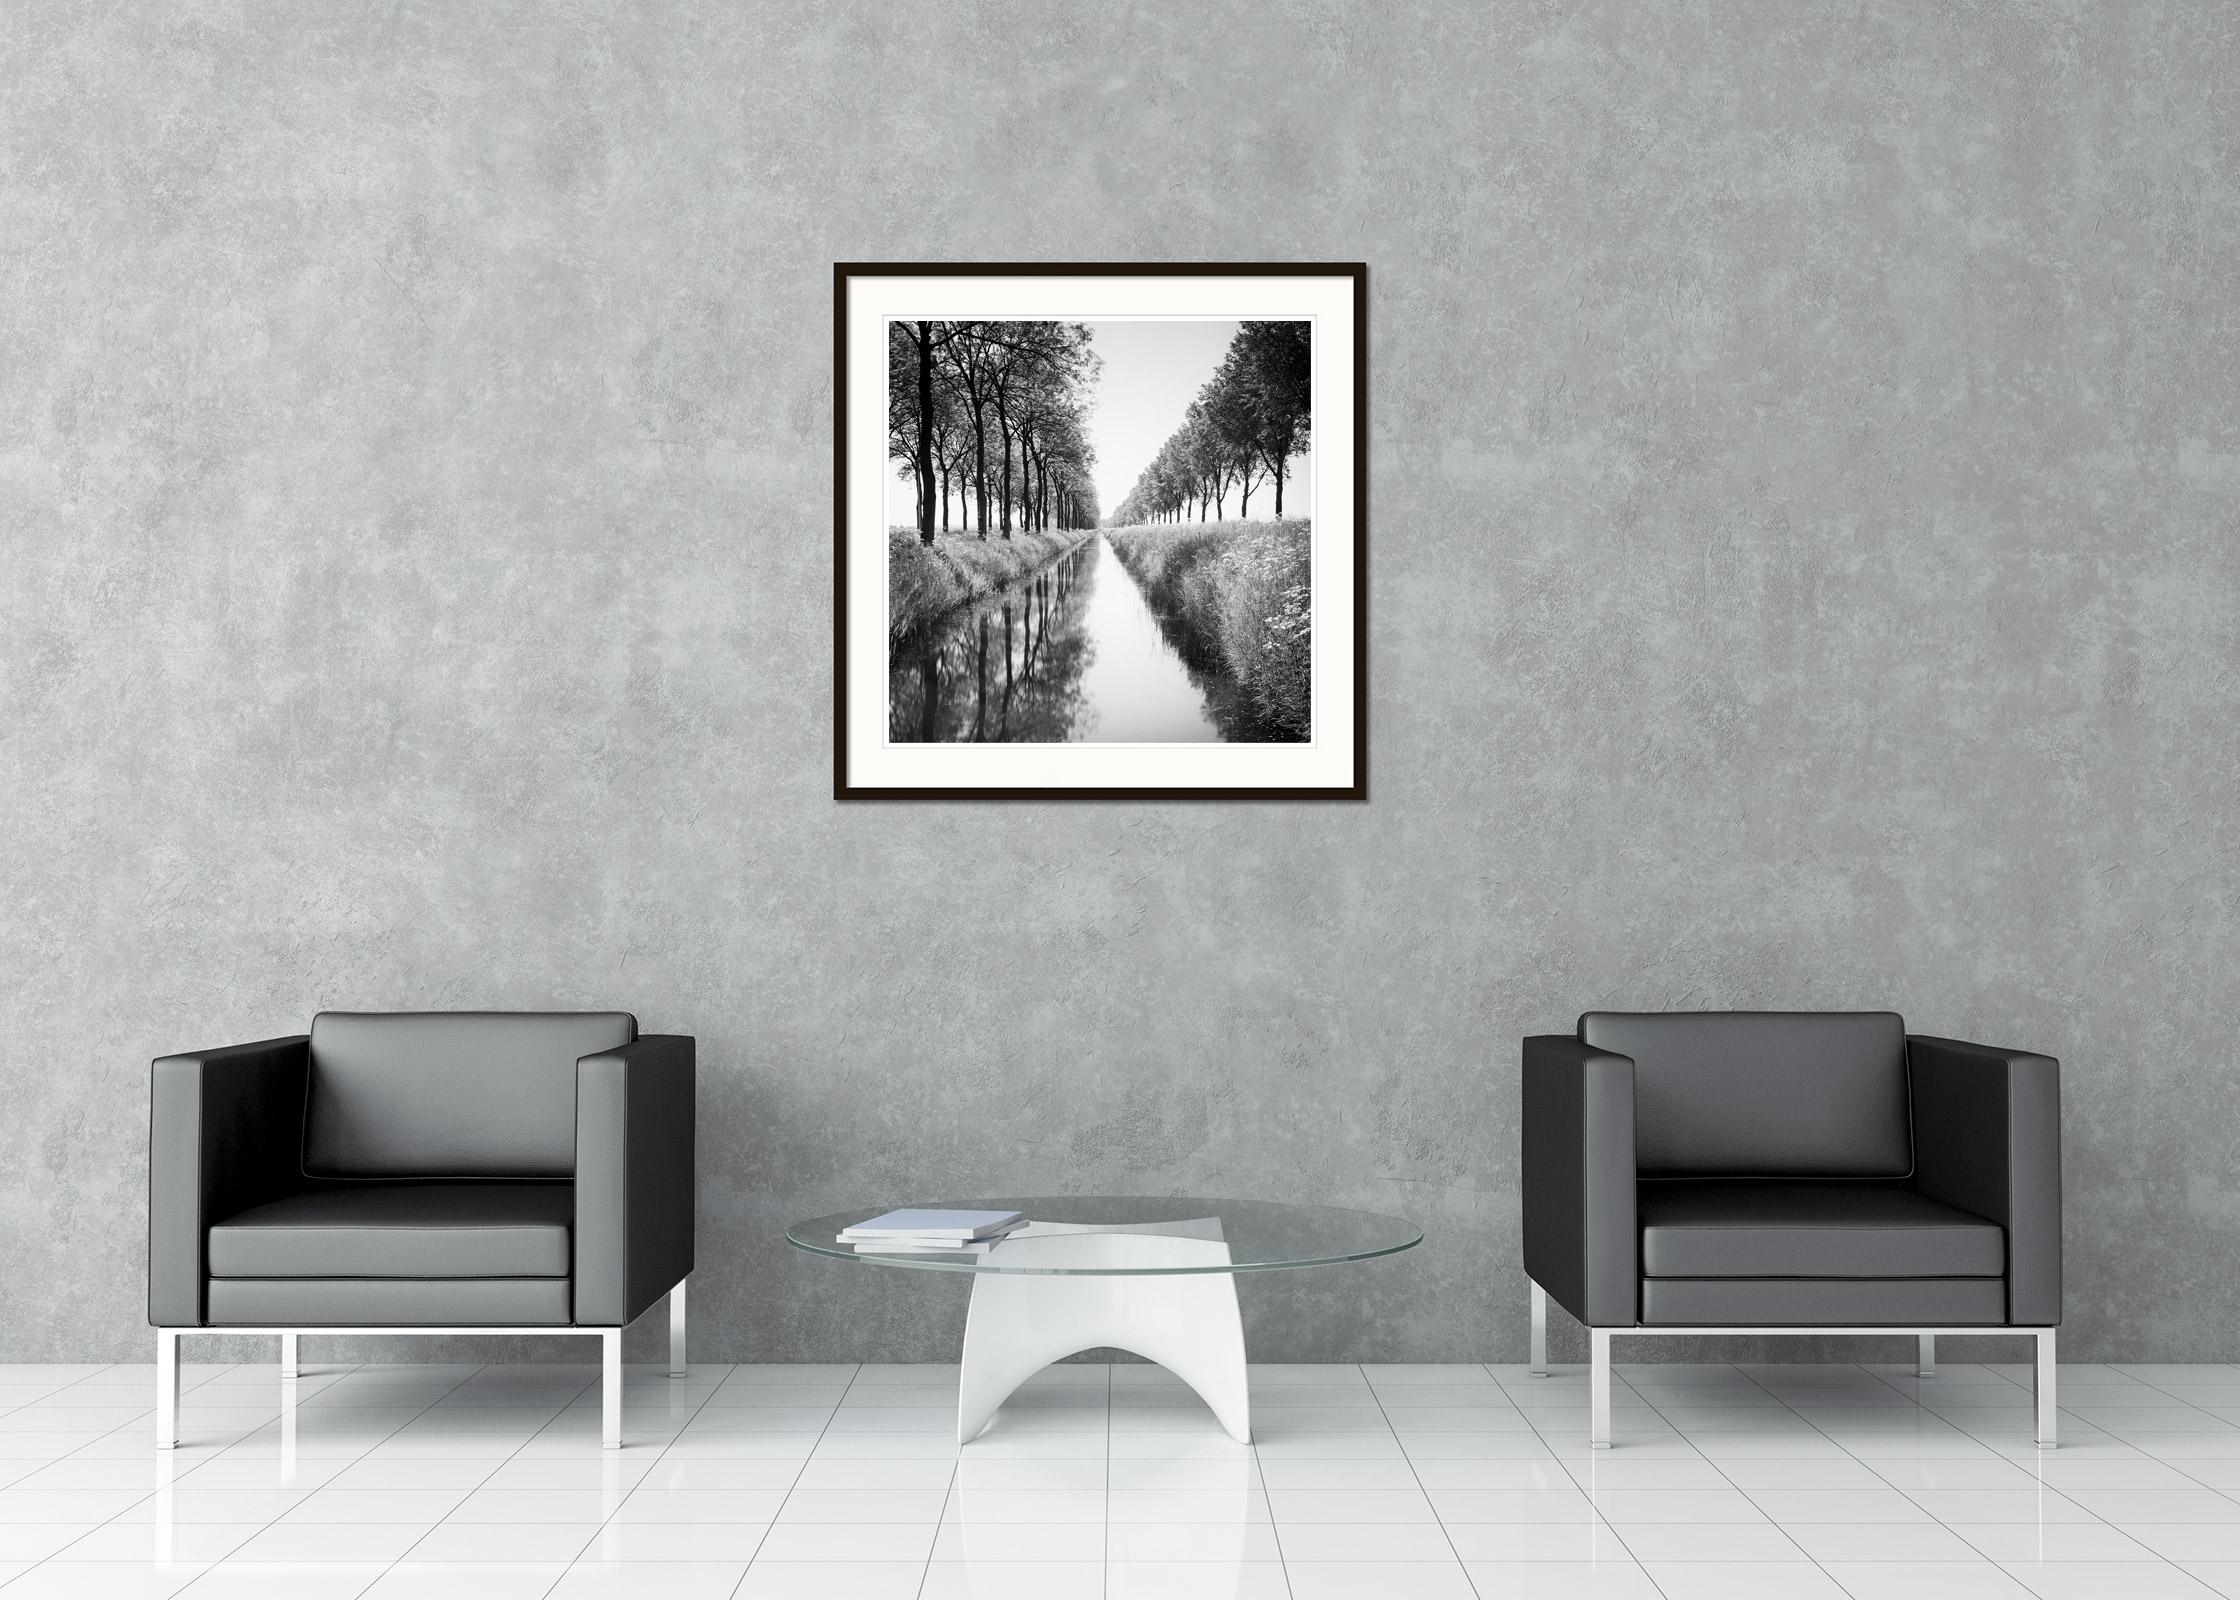 Gracht, Tree Avenue,  Netherlands, black and white photography, landscape - Contemporary Photograph by Gerald Berghammer, Ina Forstinger